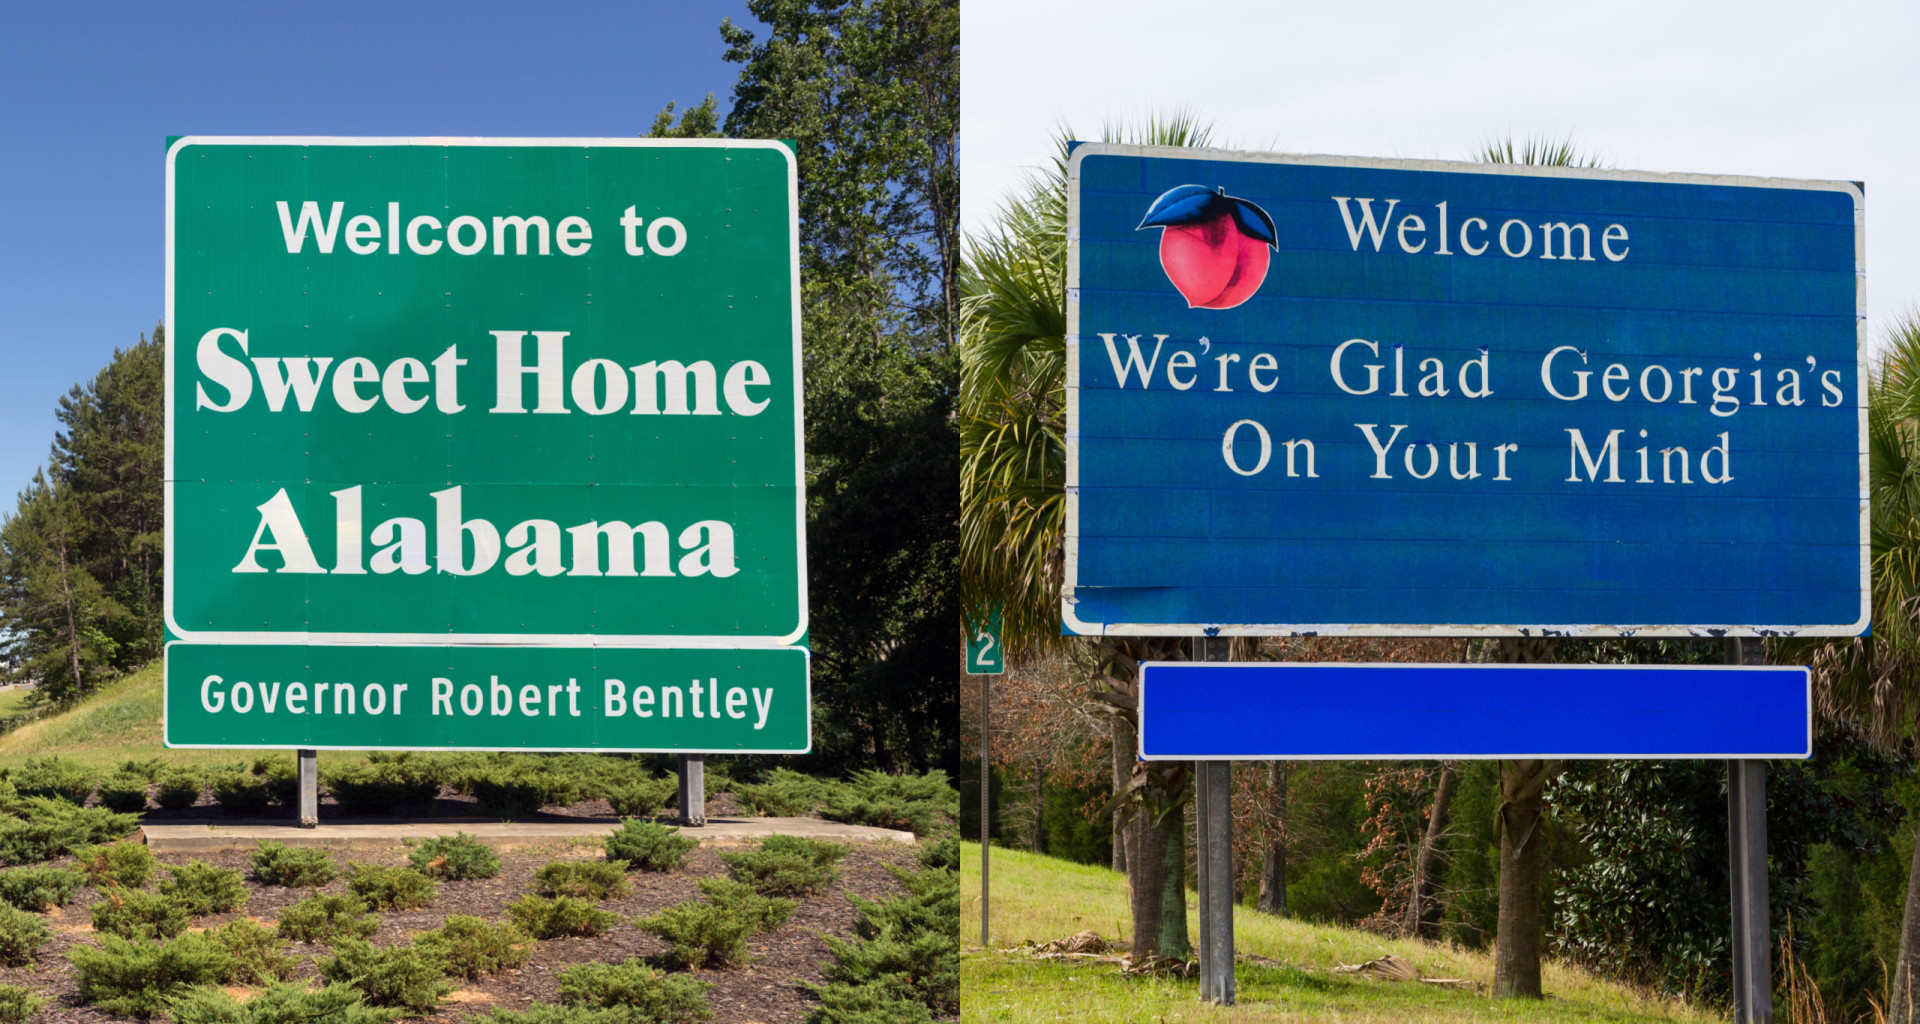 <p>Welcome signs serve as indicators of having crossed state lines. They are also important tools in marketing a state to visitors. Some US states have really interesting signage; many feature <a href="https://www.starsinsider.com/lifestyle/220309/the-surprising-history-behind-every-state-nickname" rel="noopener">nicknames</a> and slogans, and also make reference to the region's unique landmarks and visitor attractions. So, how do you want to be greeted? </p> <p>In this gallery you'll find the welcome signs for all 50 US states, and the meaning behind them. Click on. </p><p>You may also like:<a href="https://www.starsinsider.com/n/102559?utm_source=msn.com&utm_medium=display&utm_campaign=referral_description&utm_content=572689en-en"> Danger Will Robinson! Le attrazioni turistiche più pericolose al mondo</a></p>